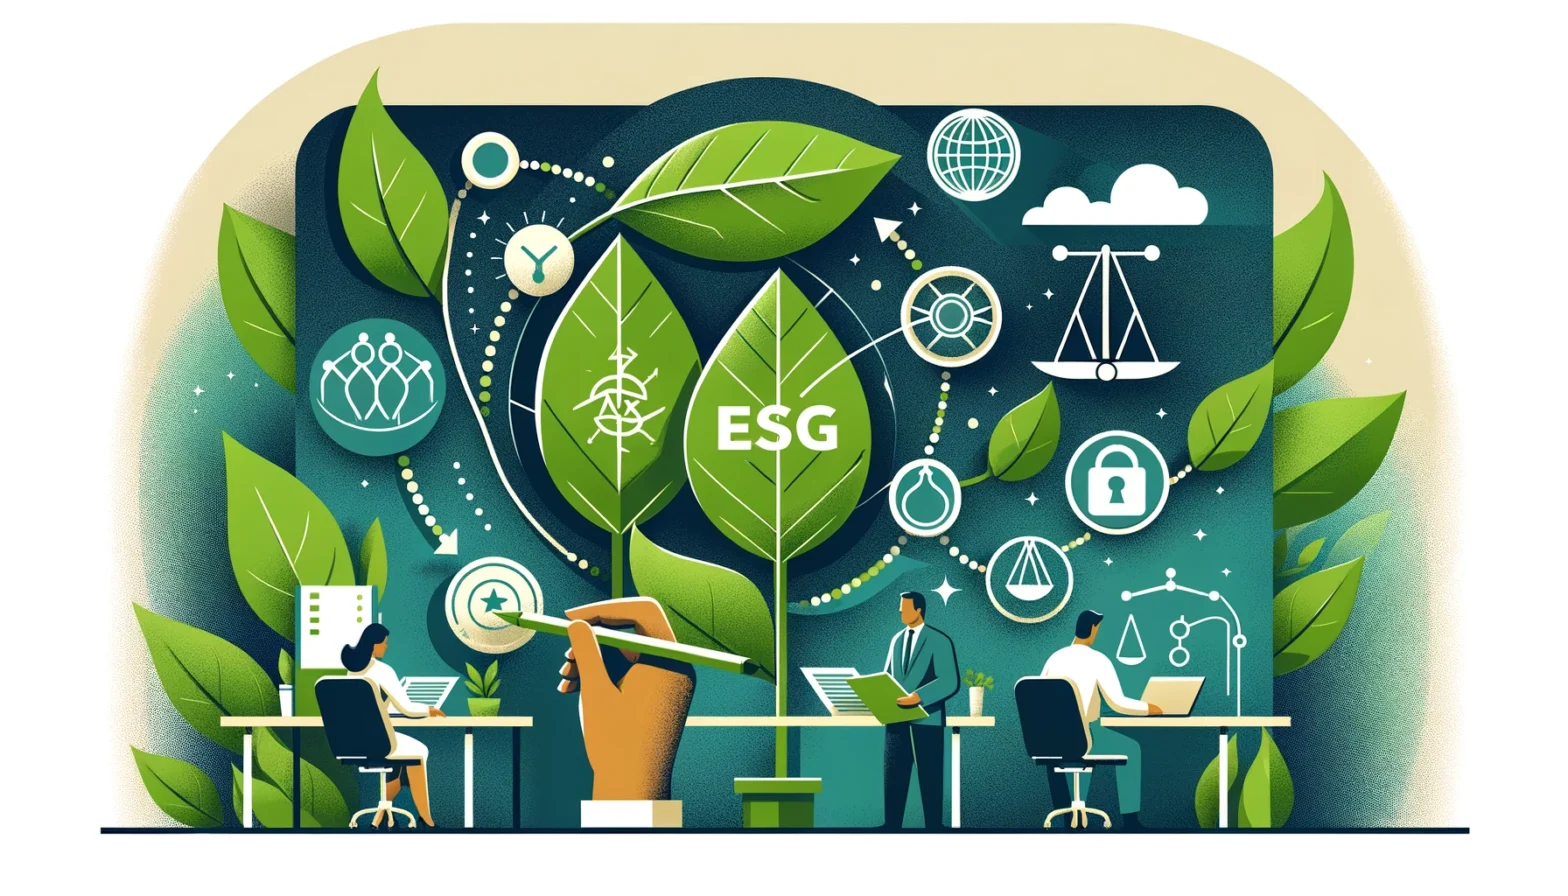 HR’s pivotal role in embedding ESG principles into corporate culture and strategy